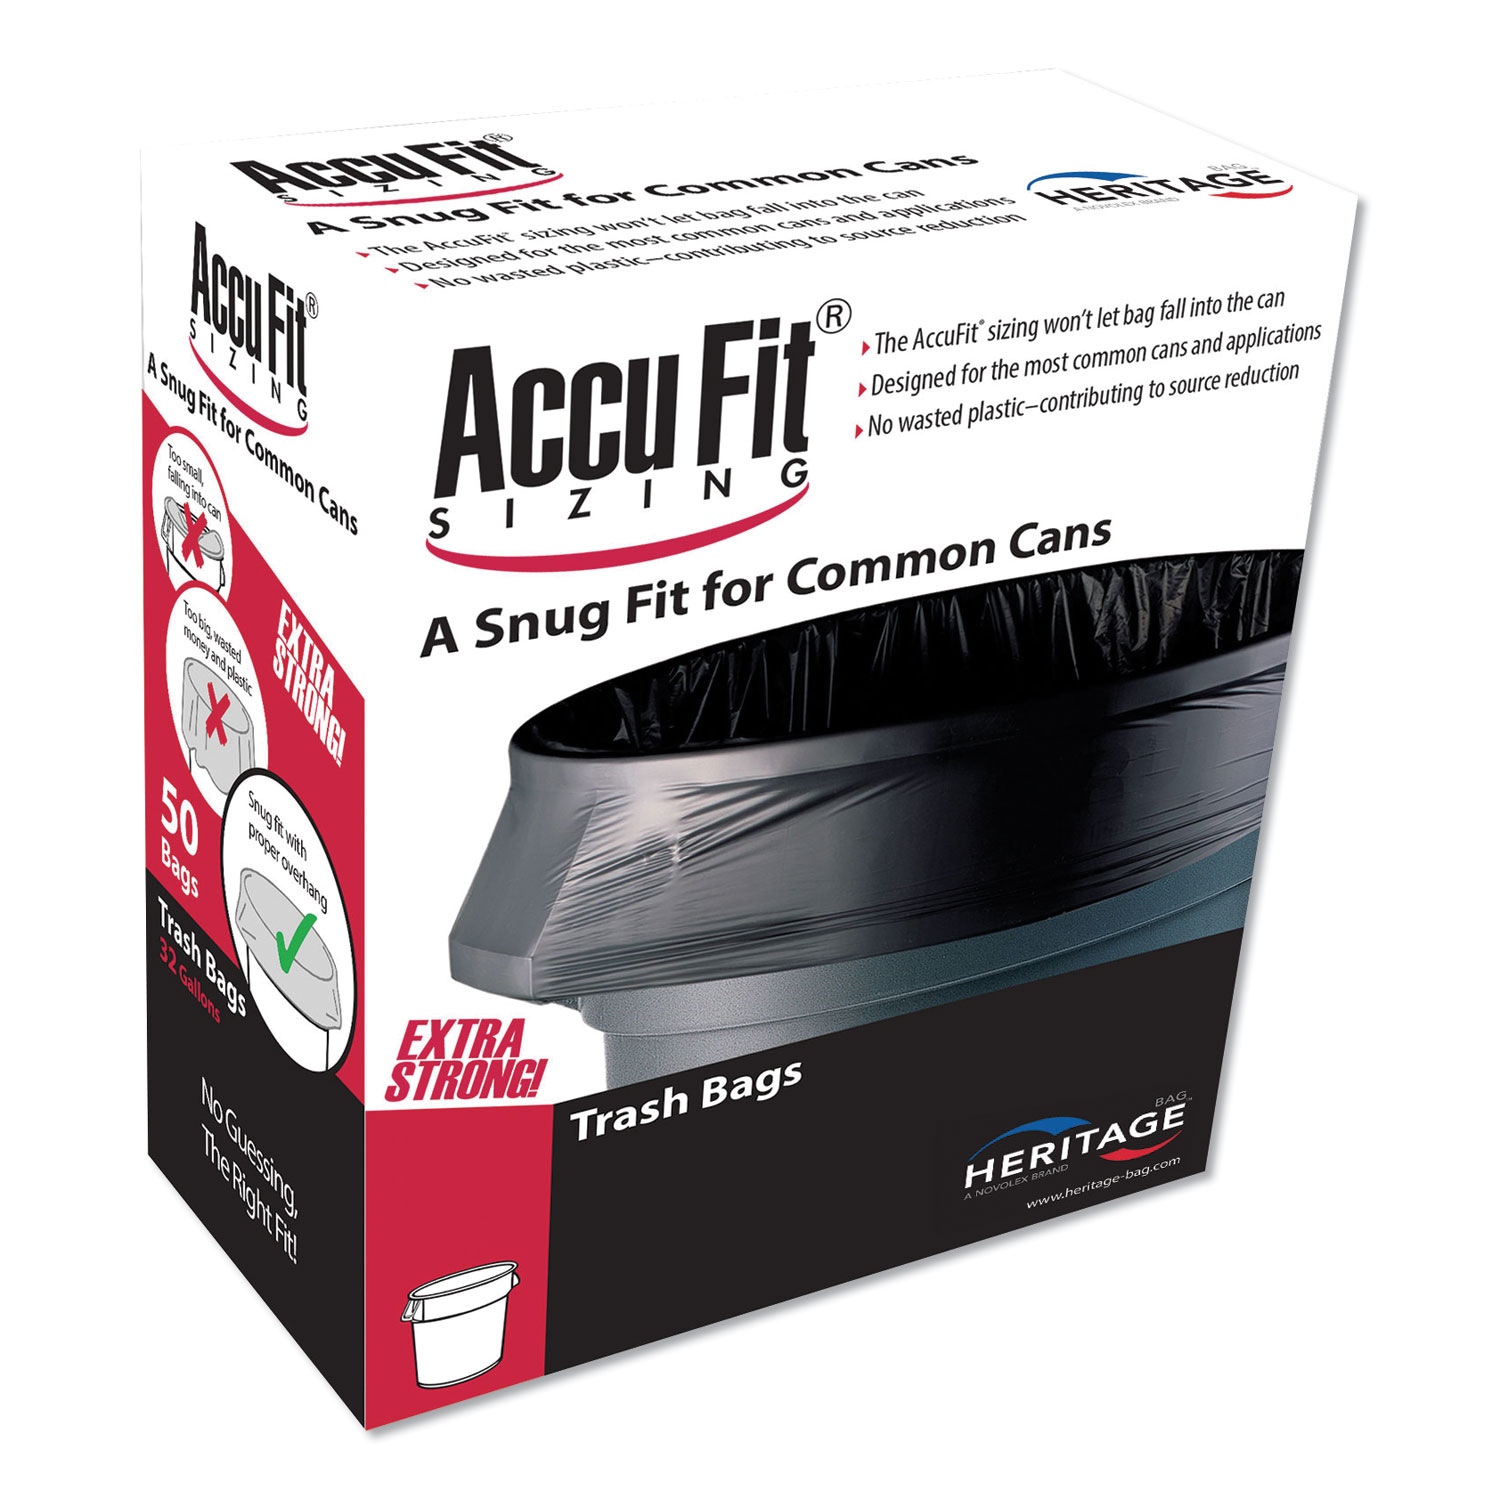  AccuFit H5645TK RC1 Linear Low Density Can Liners with AccuFit Sizing, 23 gal, 0.9 mil, 28 x 45, Black, 300/Carton (HERH5645TKRC1CT) 